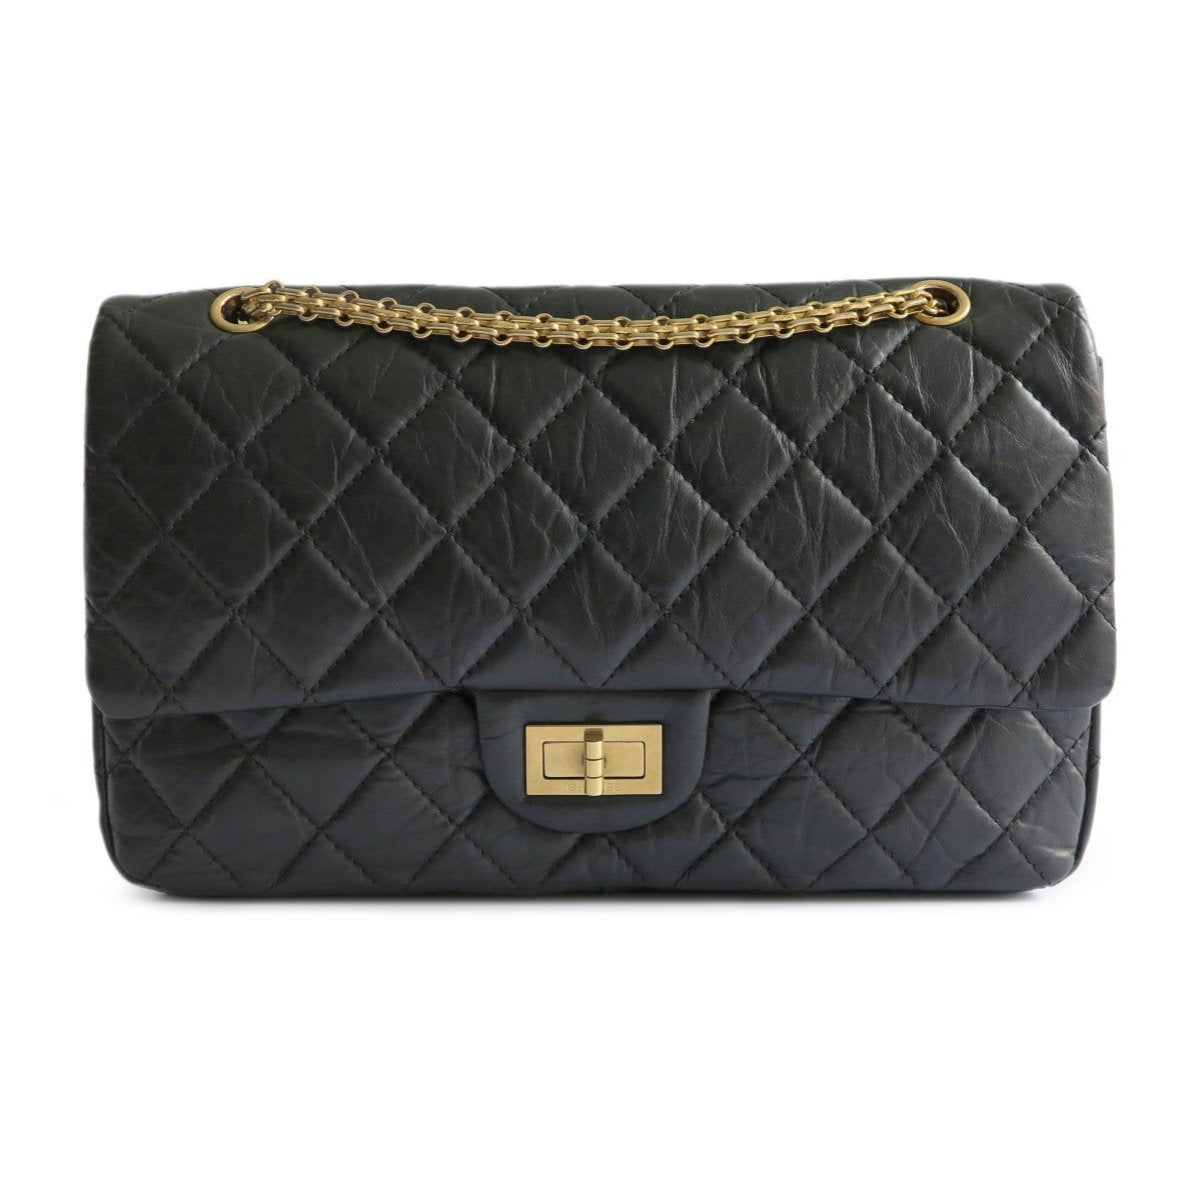 Chanel 2.55 Reissue Flap Bag Size 227 in Black Aged Calfskin